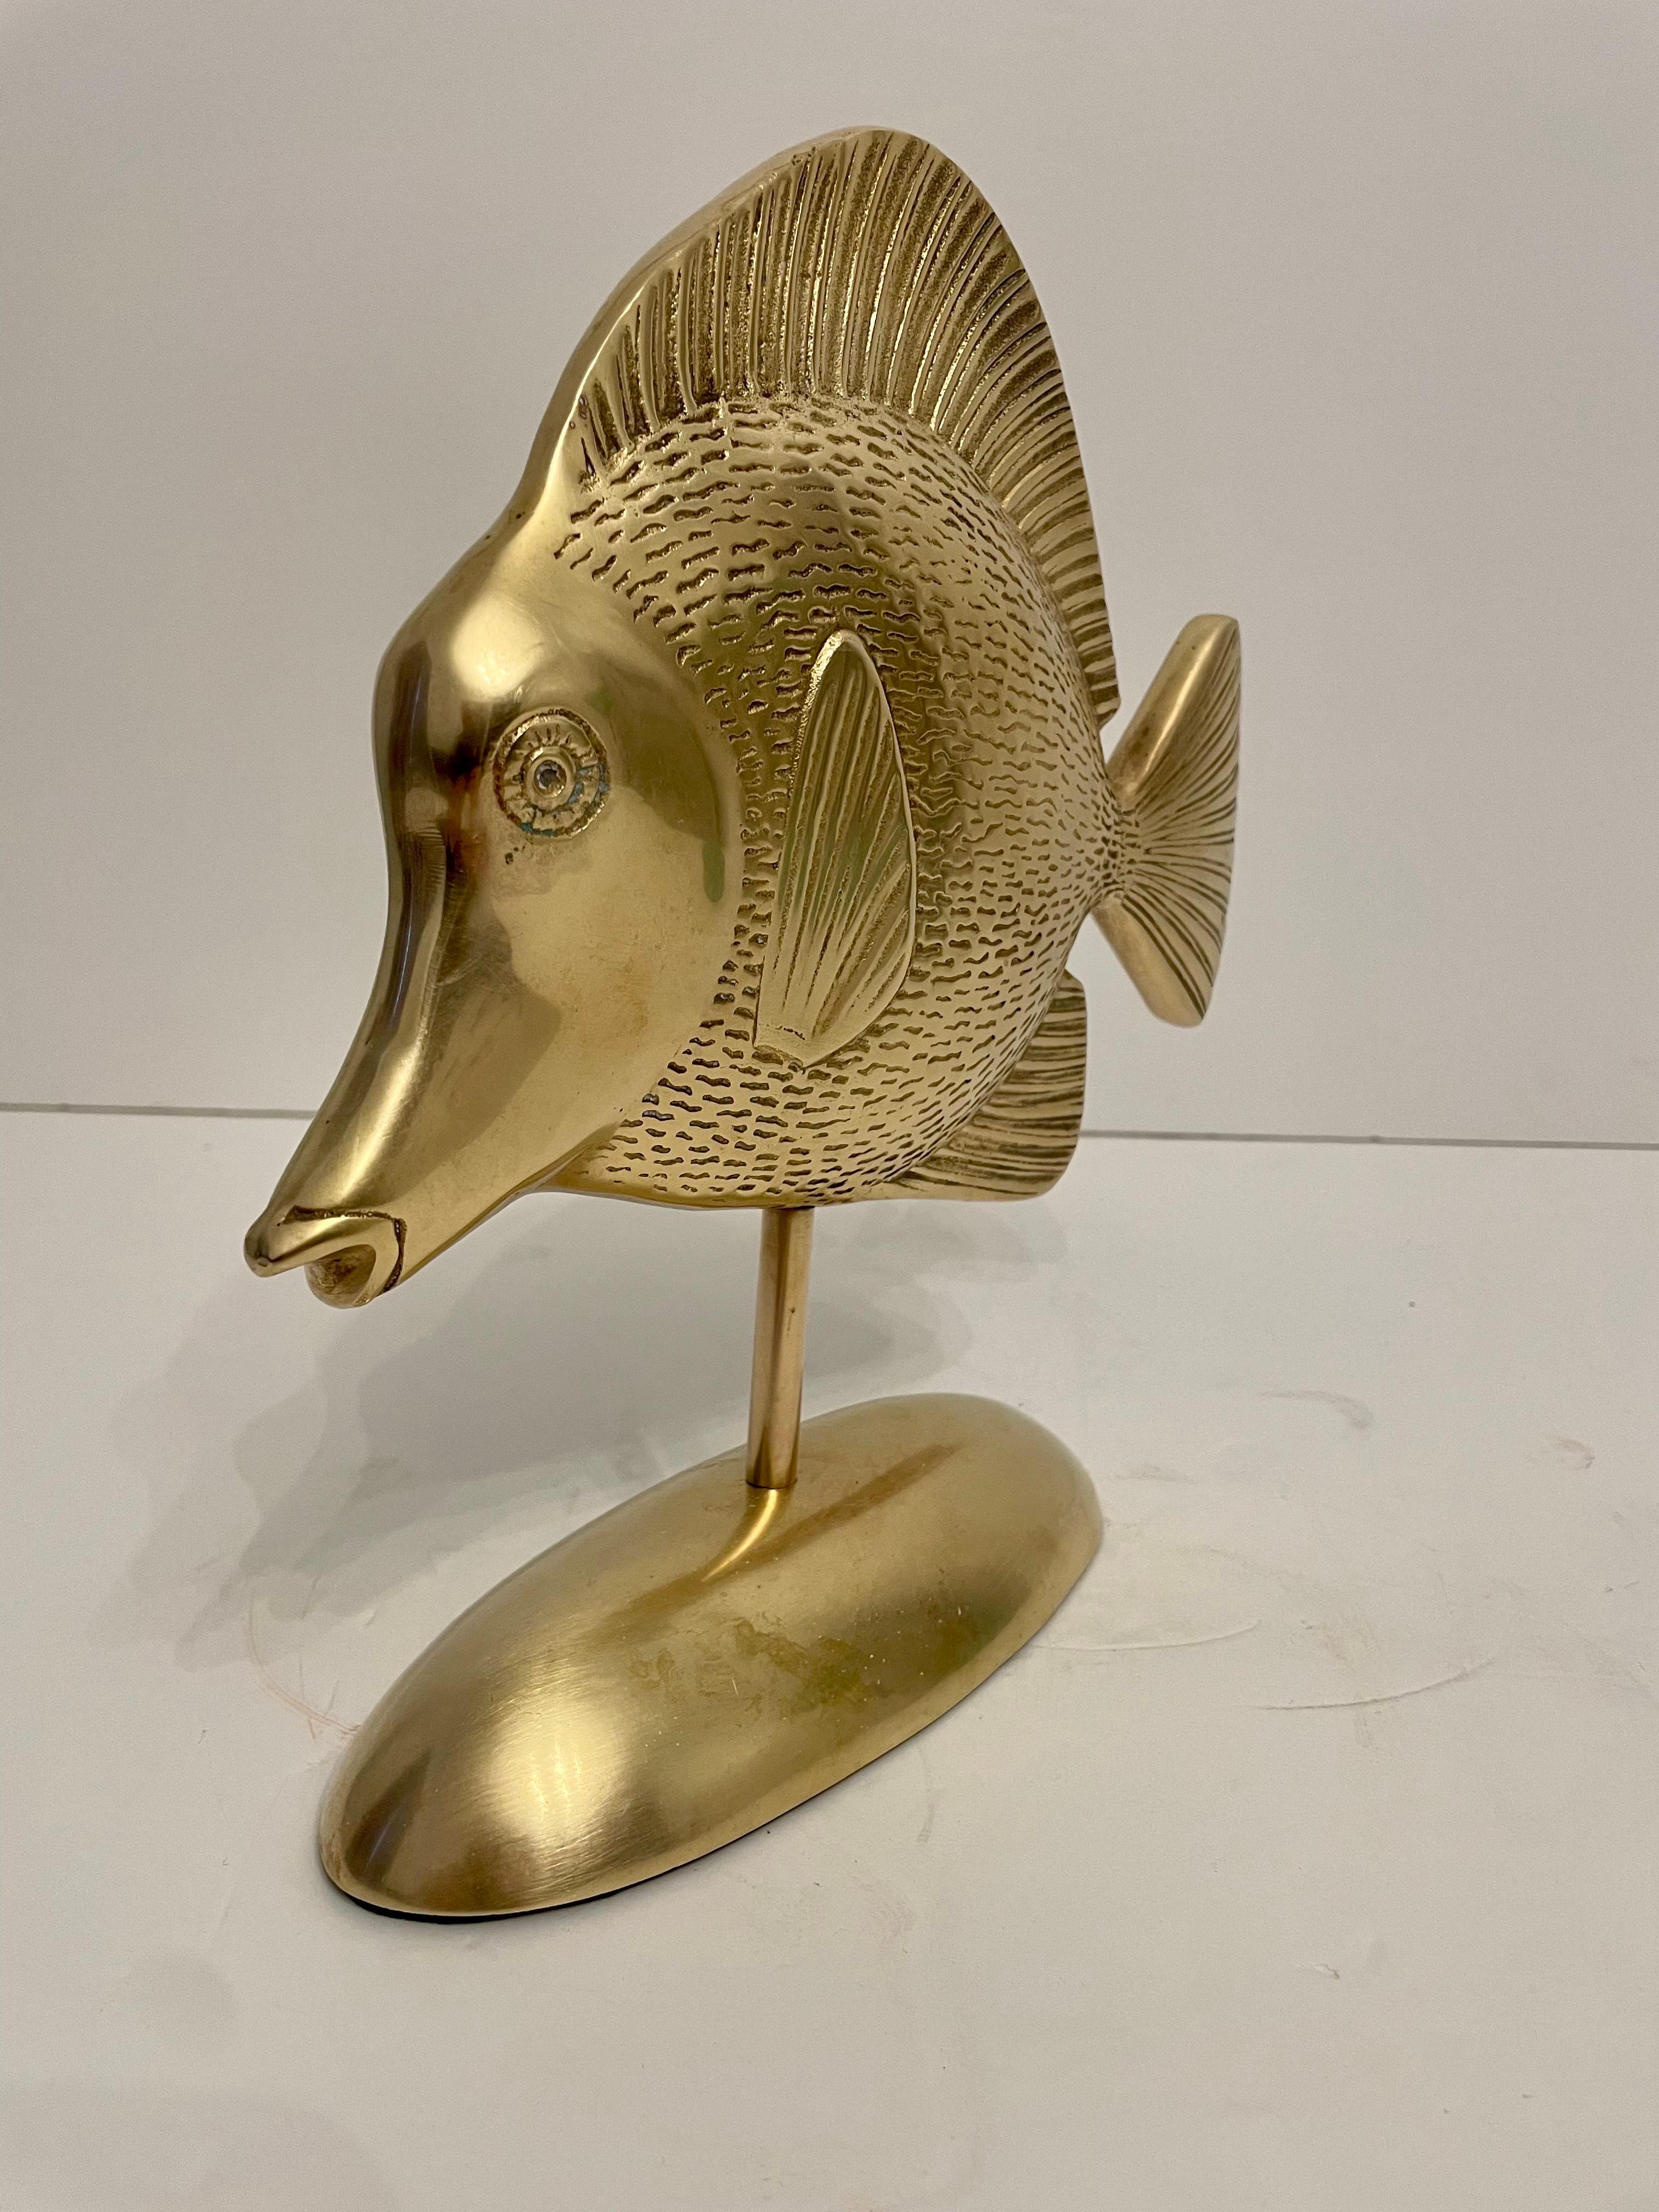 20th Century Brass Tropical Fish Sculpture on Stand